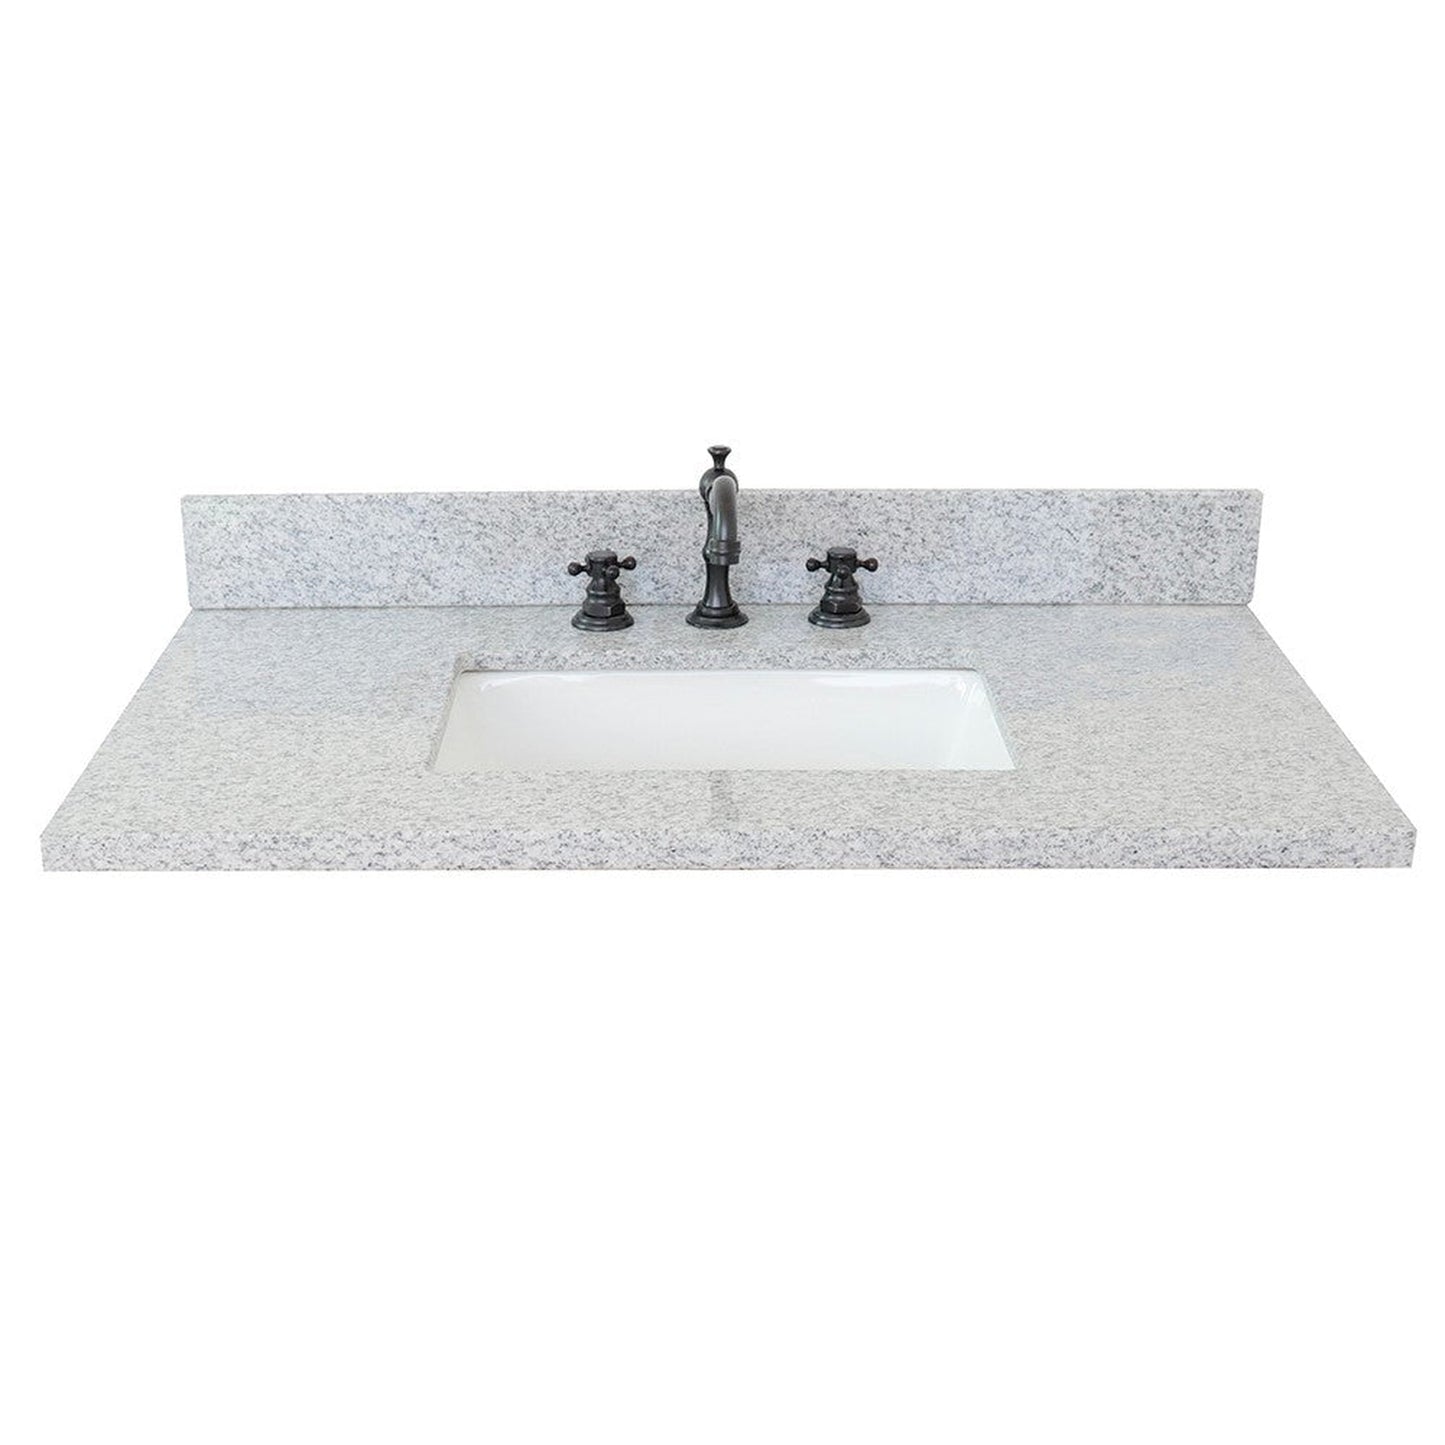 Bellaterra Home 37" x 22" Gray Granite Three Hole Vanity Top With Undermount Rectangular Sink and Overflow